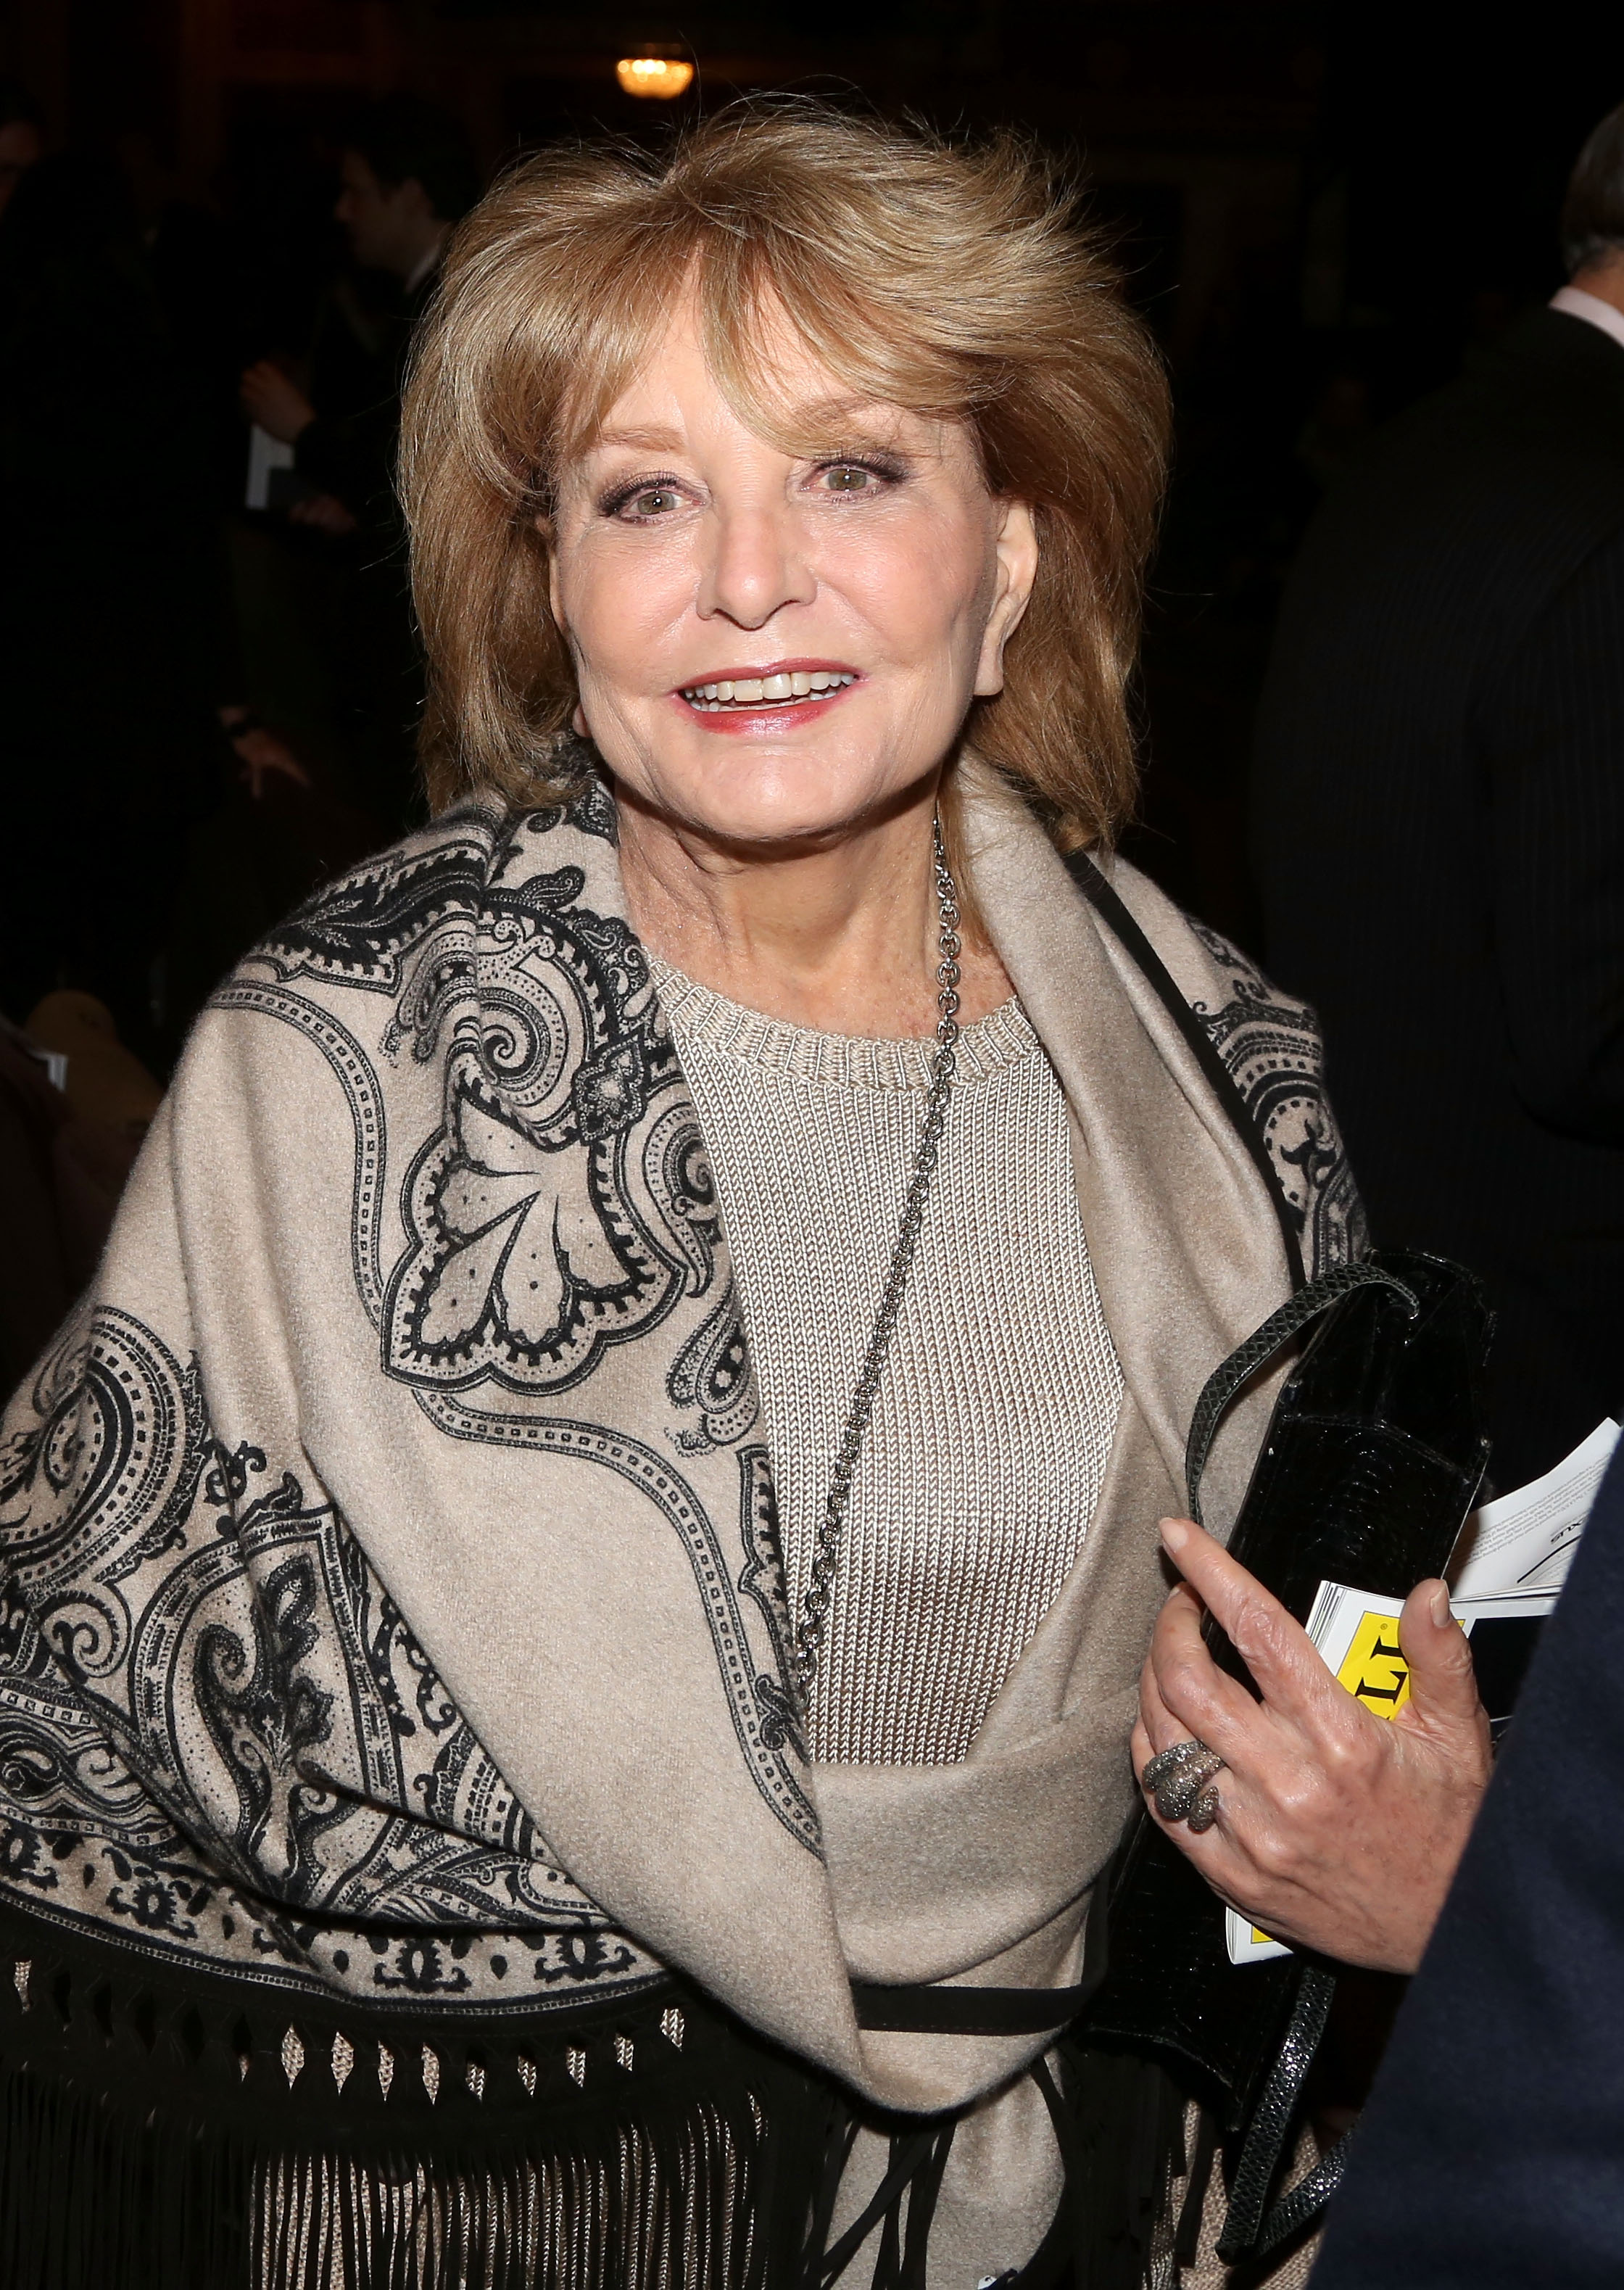 Barbara Walters at the Opening Night of "School of Rock" on Broadway on December 6, 2015, in New York City | Source: Getty Images